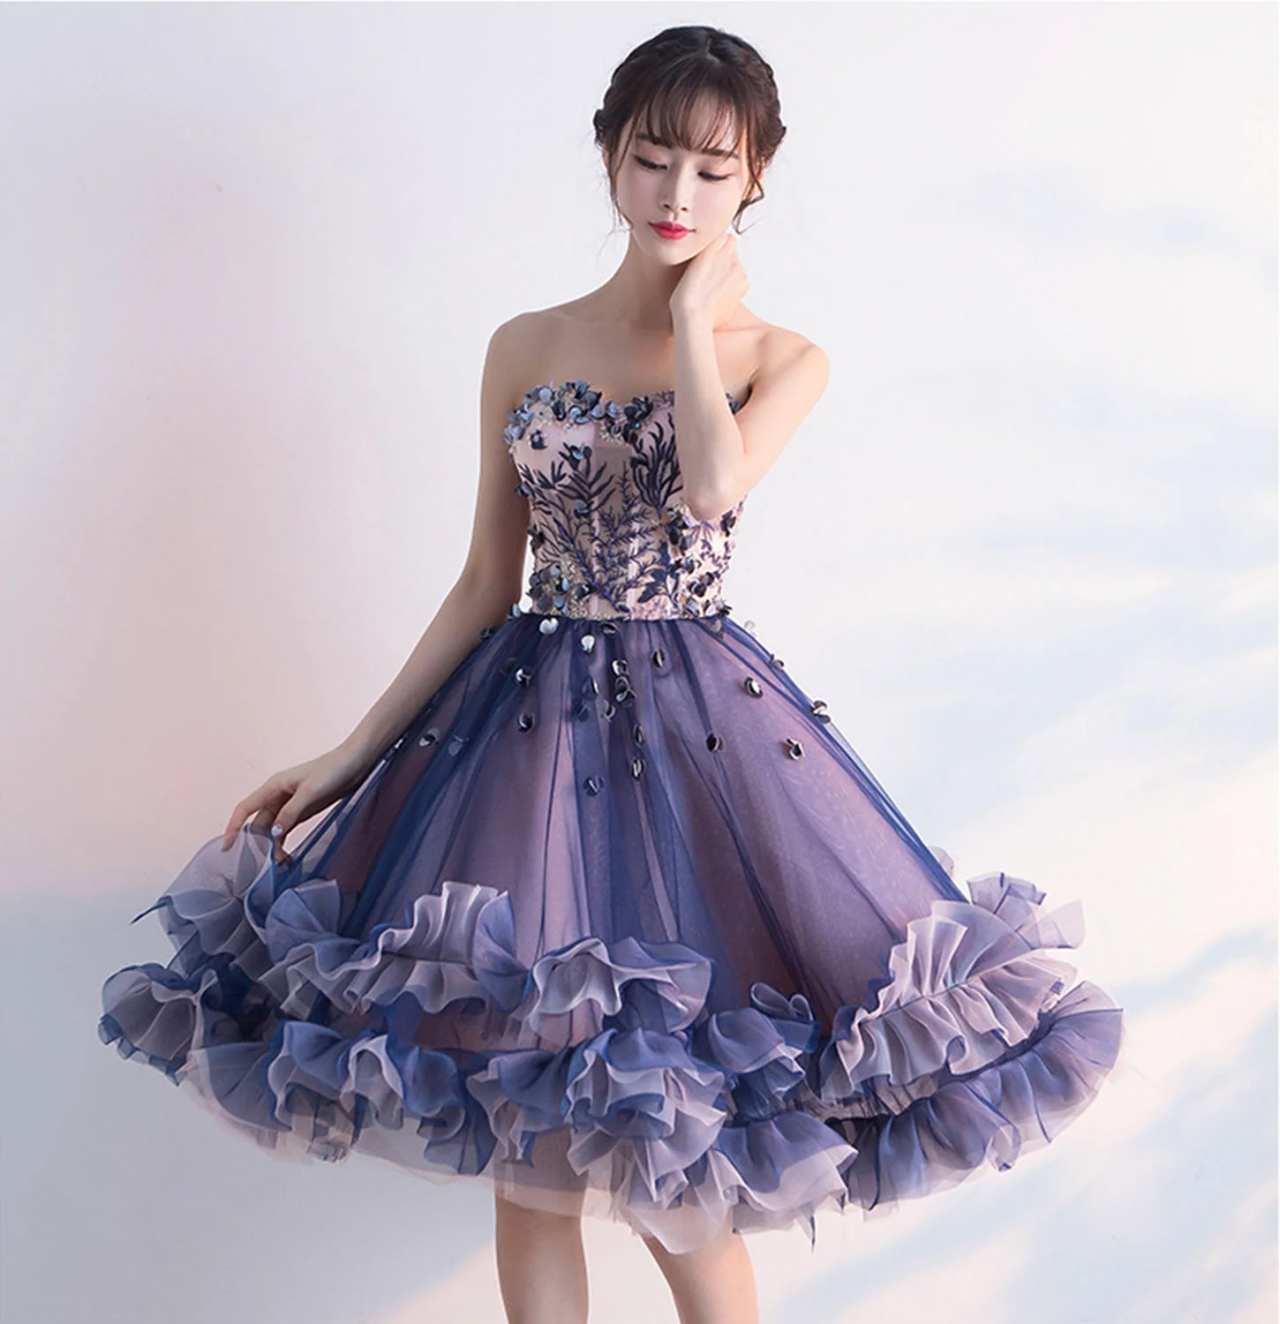 Purple Tulle Lace Short Prom Dress Cute Homecoming Dress With Applique